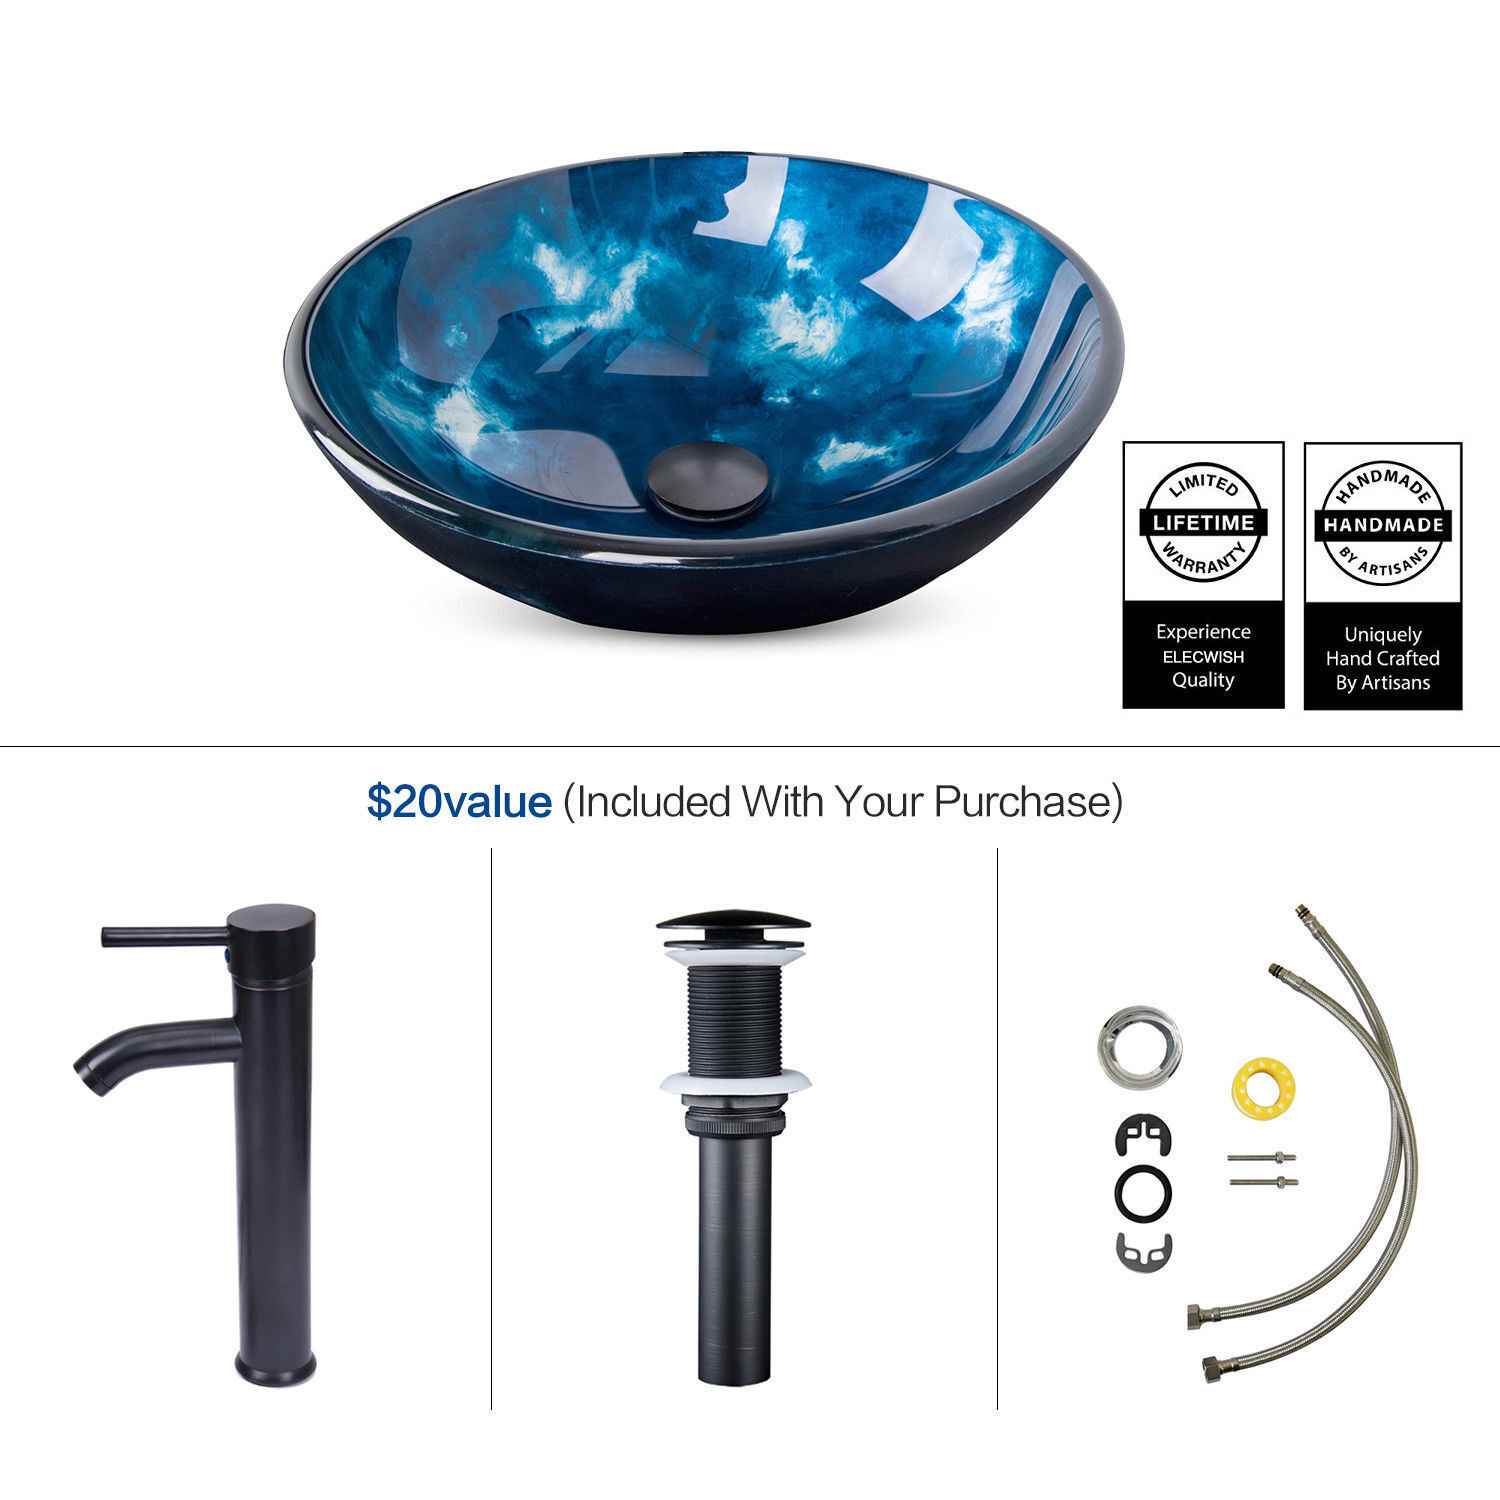 Elecwish round ocean blue sink included parts